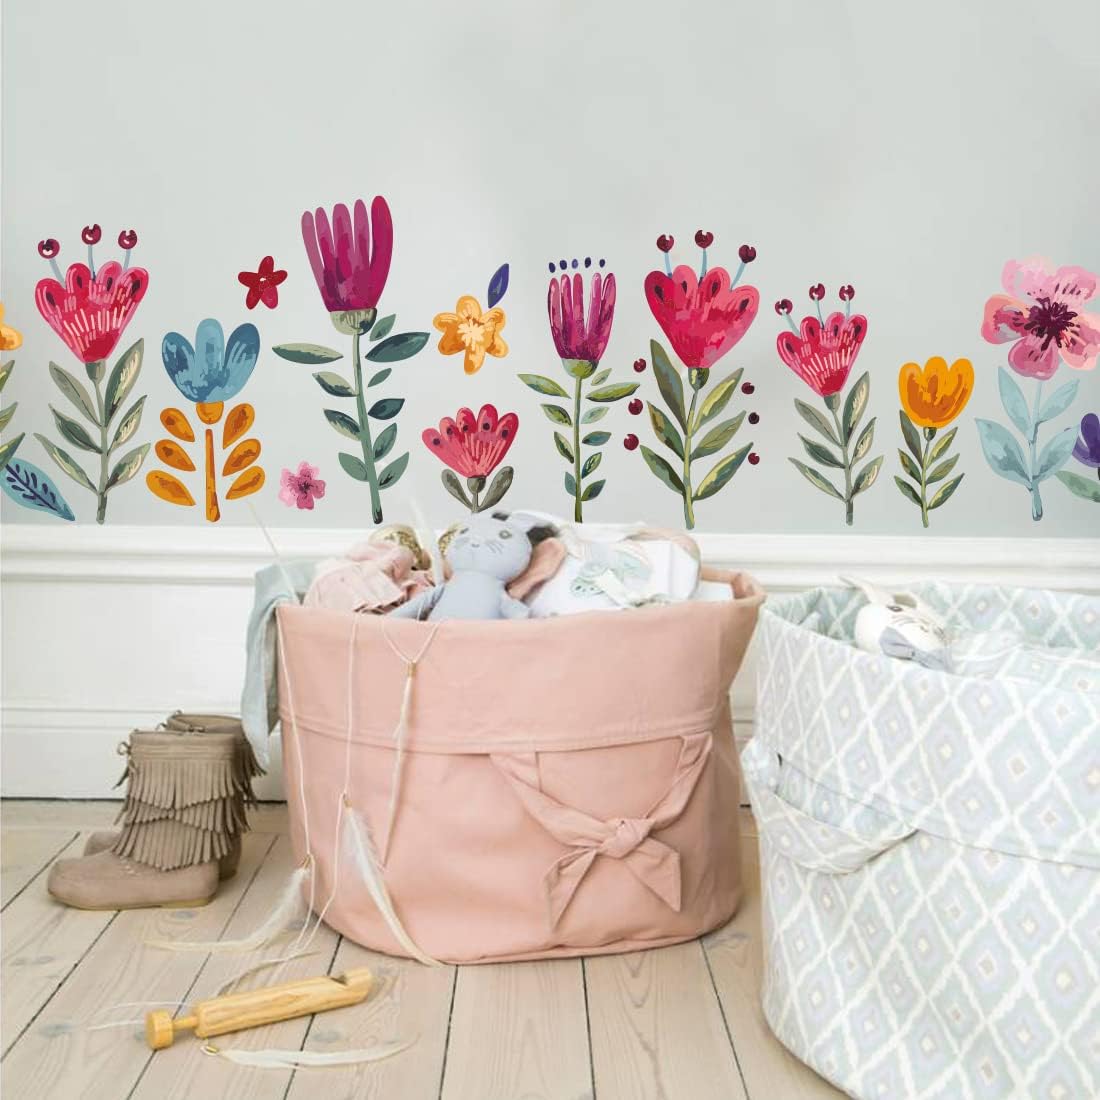 Flowers Wall Decals for Girls Bedroom - Children DIY Wall Art Stickers for Classroom, Nursery, playroom - Preschool Floral Peel and Stick Decor